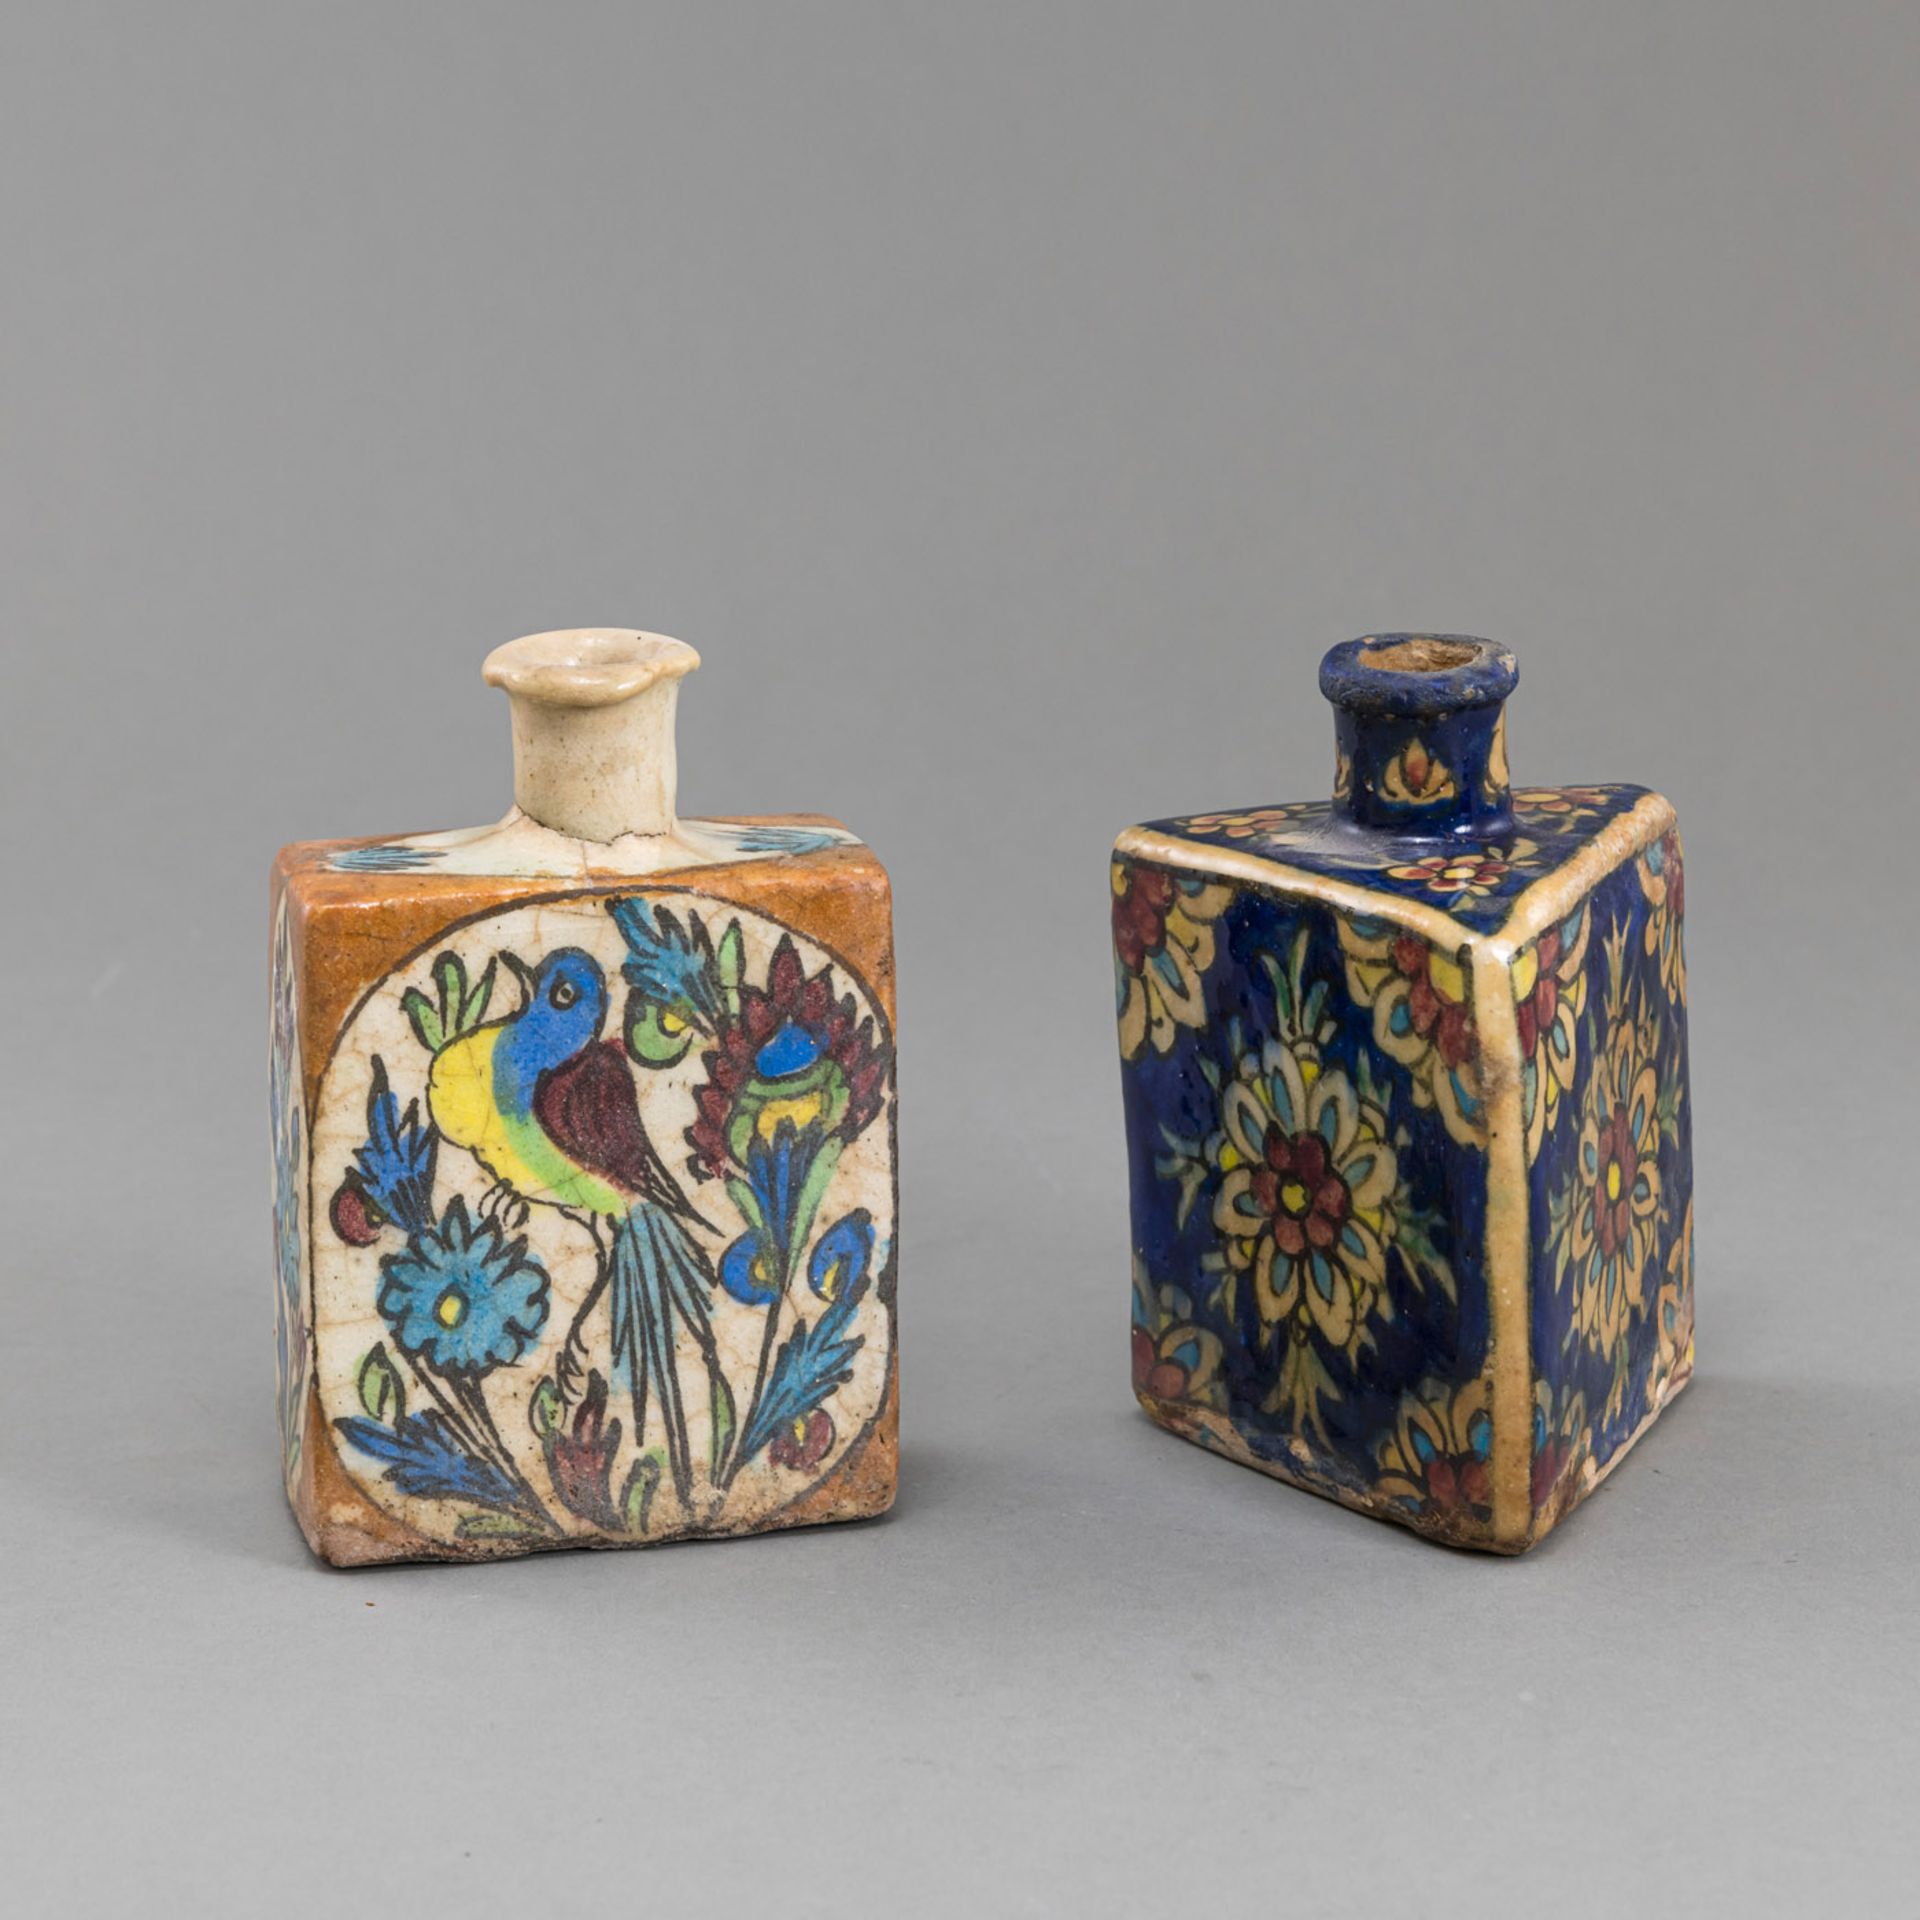 TWO POLYHROME GLAZED POTTERY VASES WITH FLORAL AND ANIMAL DECORATION